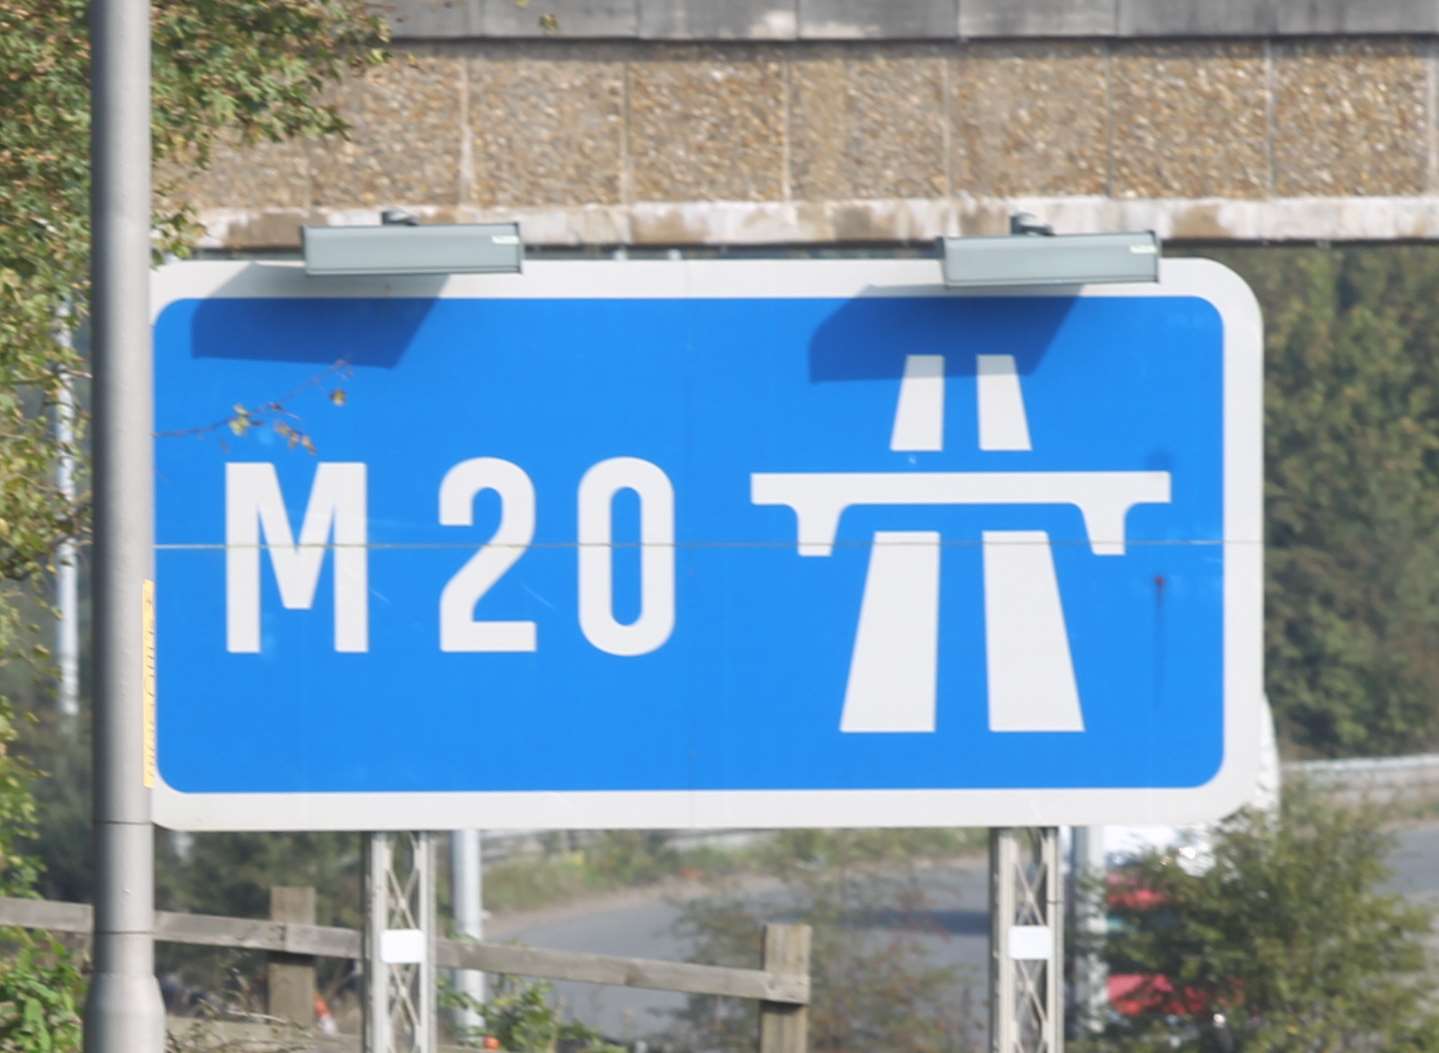 All three lanes on the M20 coastbound are set to close for repairs. Picture: John Westhrop